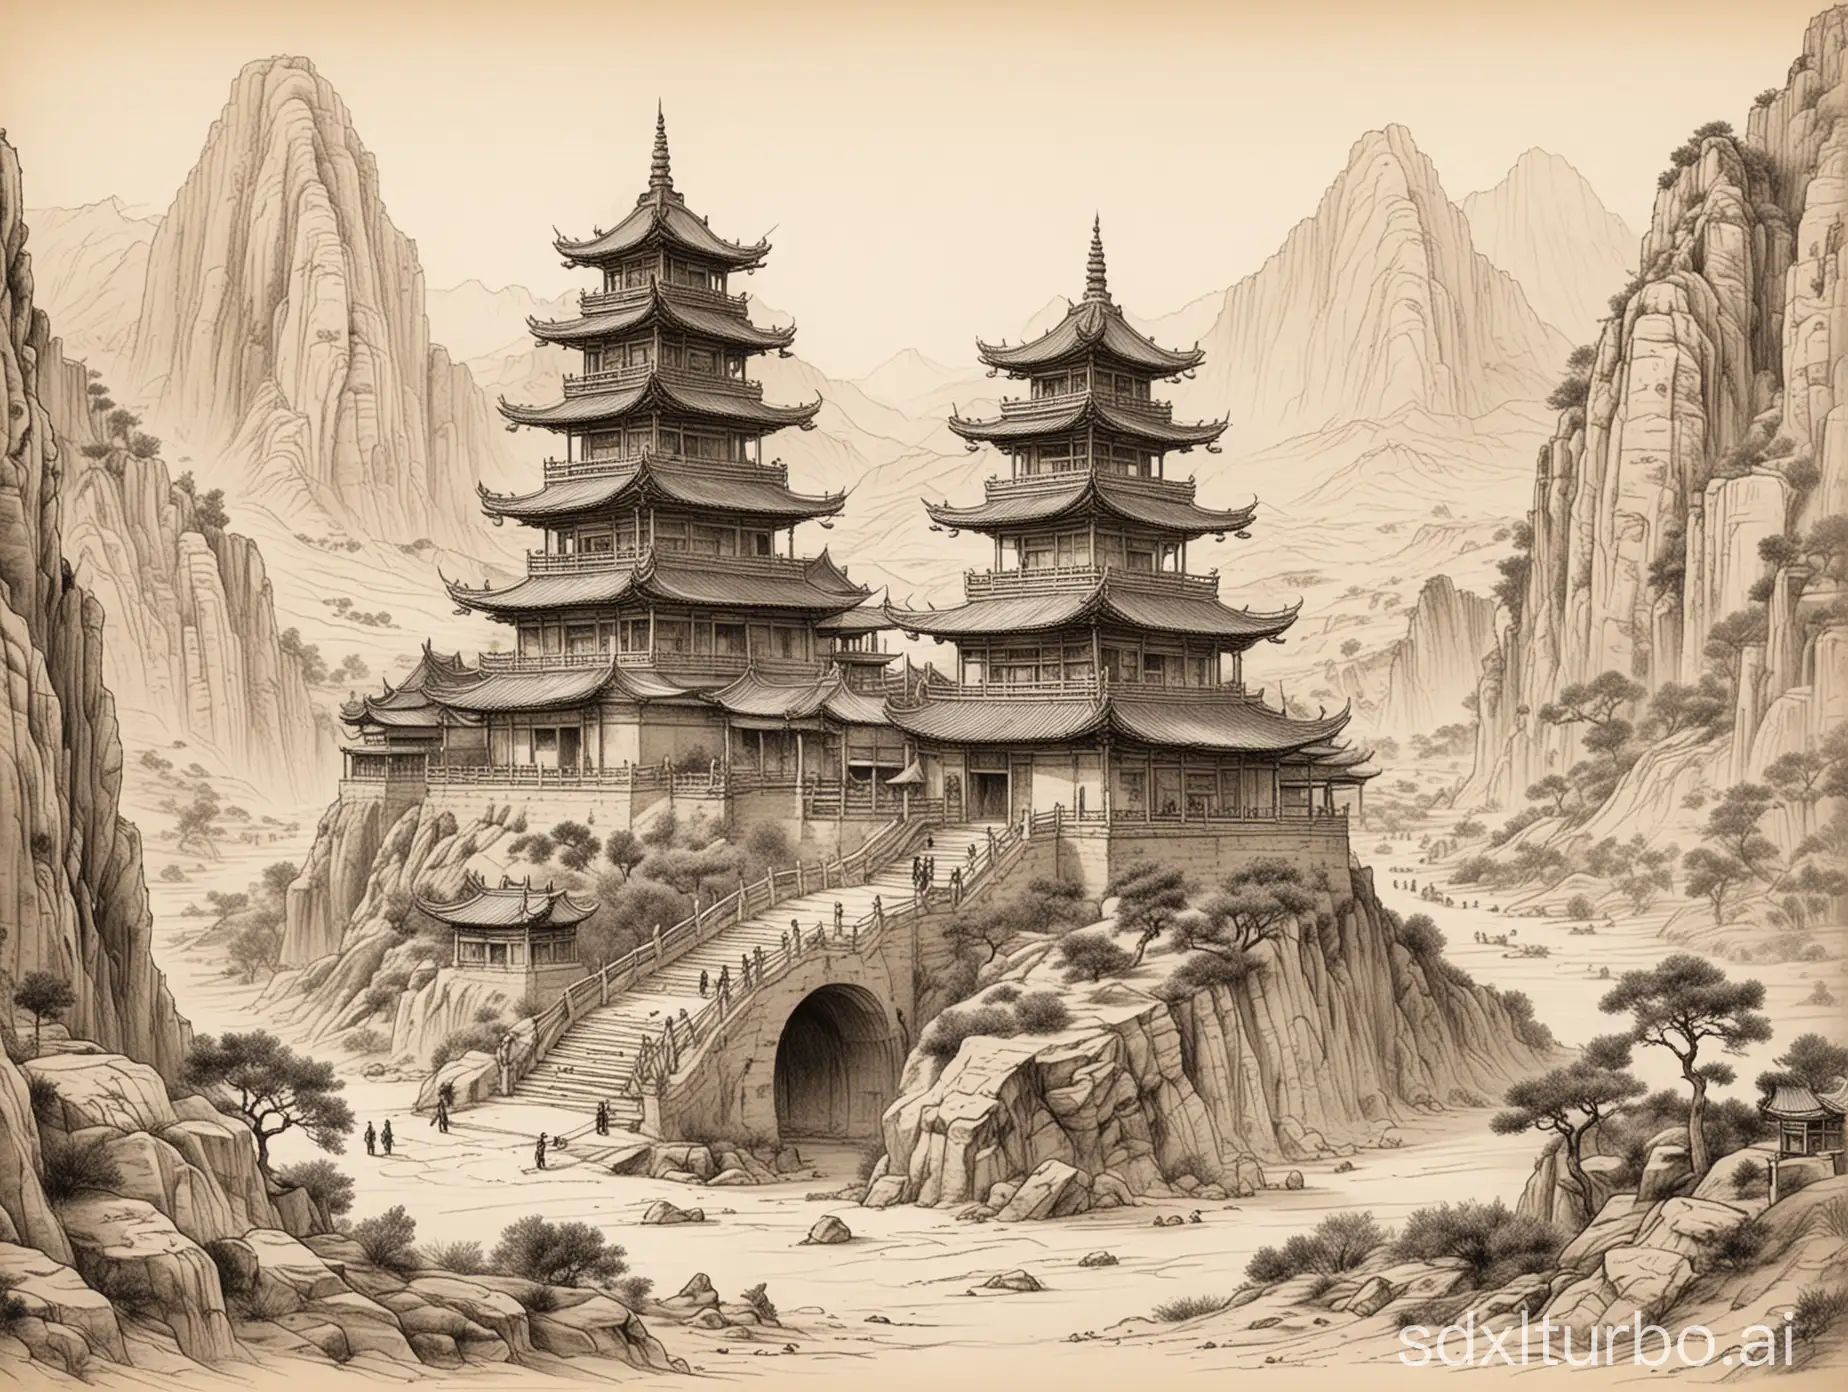 Hand-Drawn-Sketch-of-Dunhuang-Nine-Tiers-Pagoda-in-Pencil-Chaos